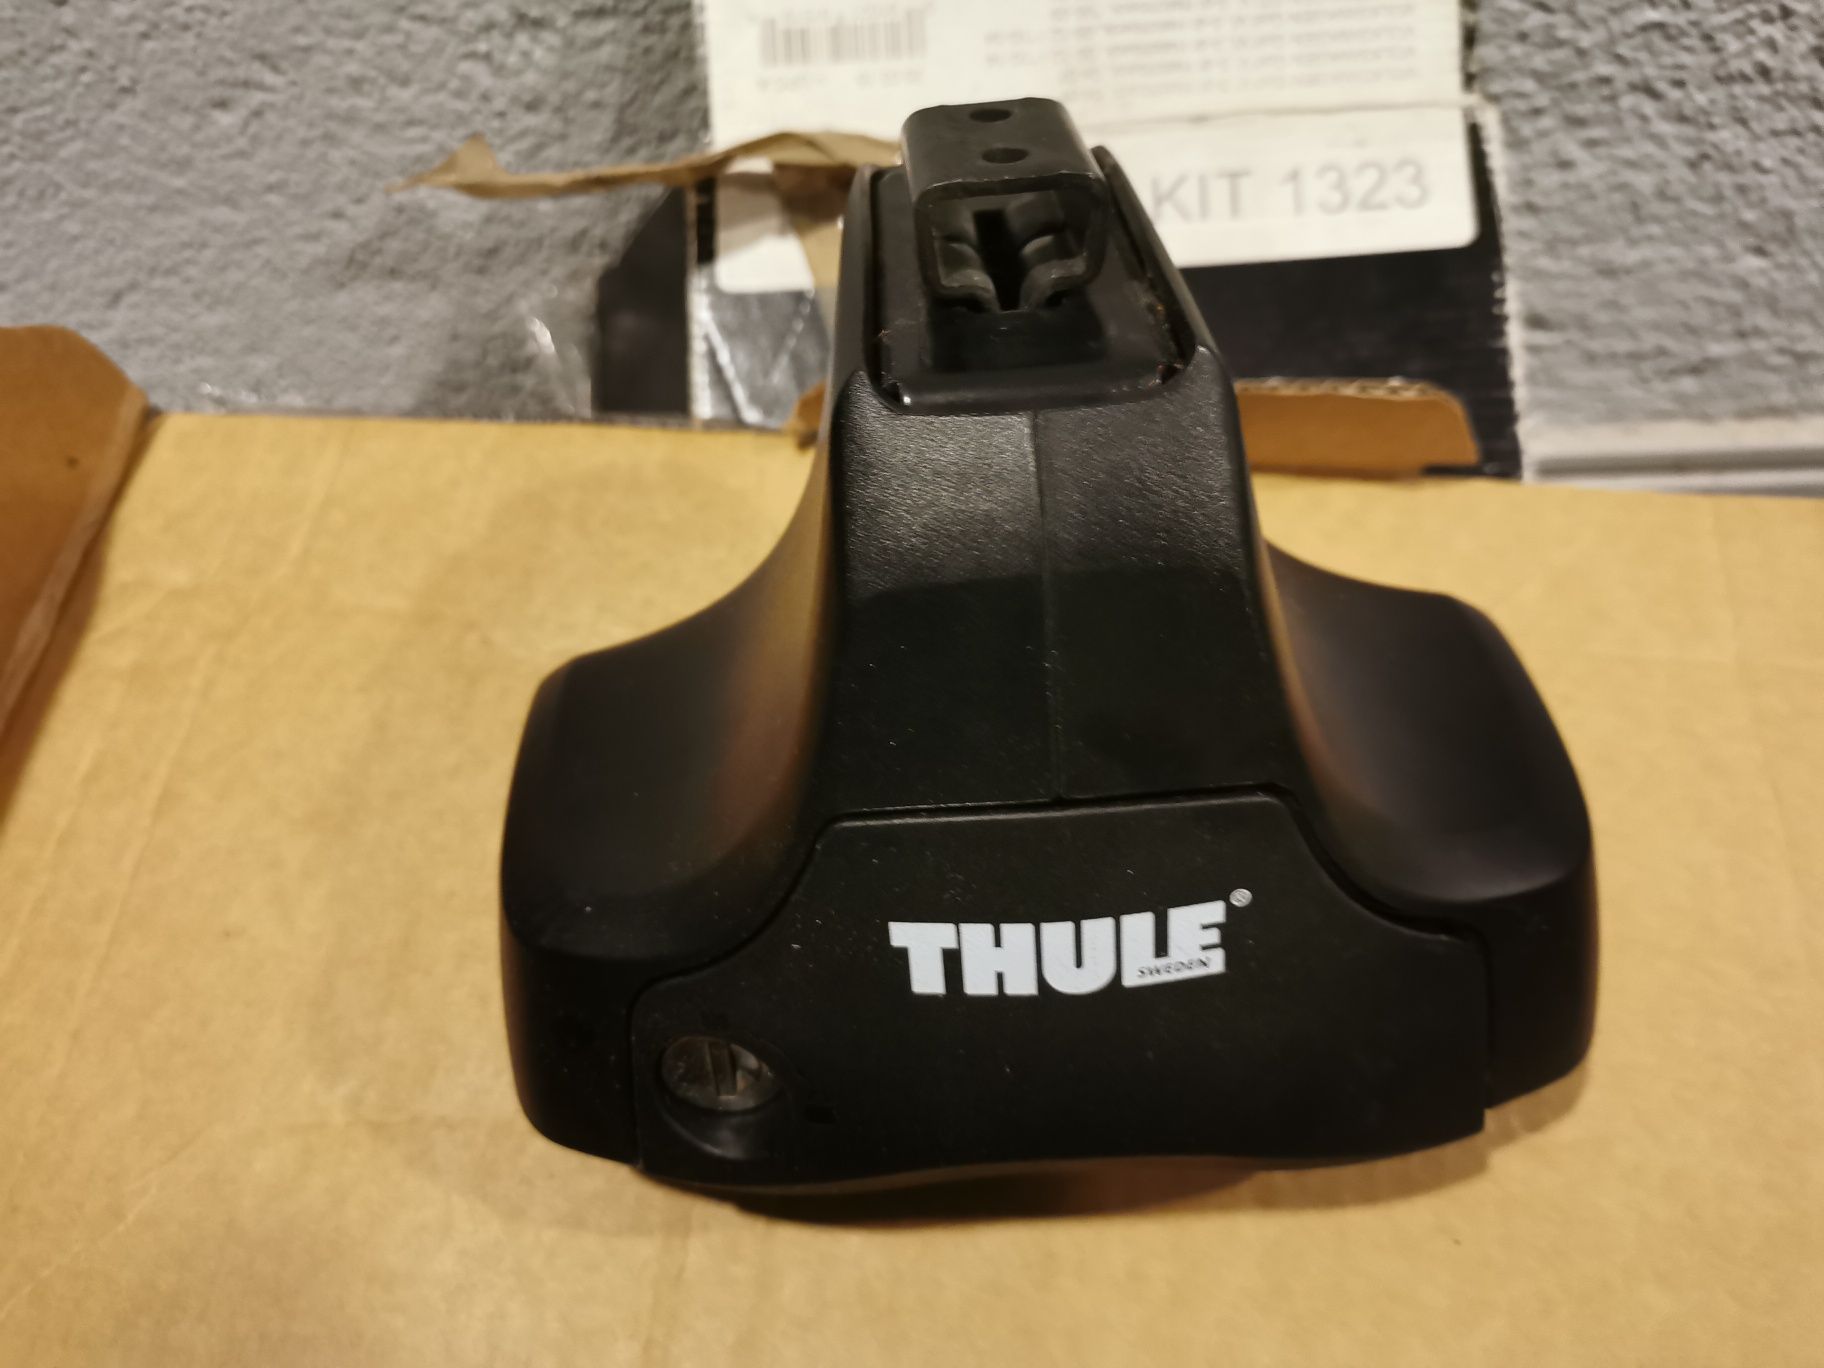 Thule rapid system 754 e kit 1323 ( incompleto)